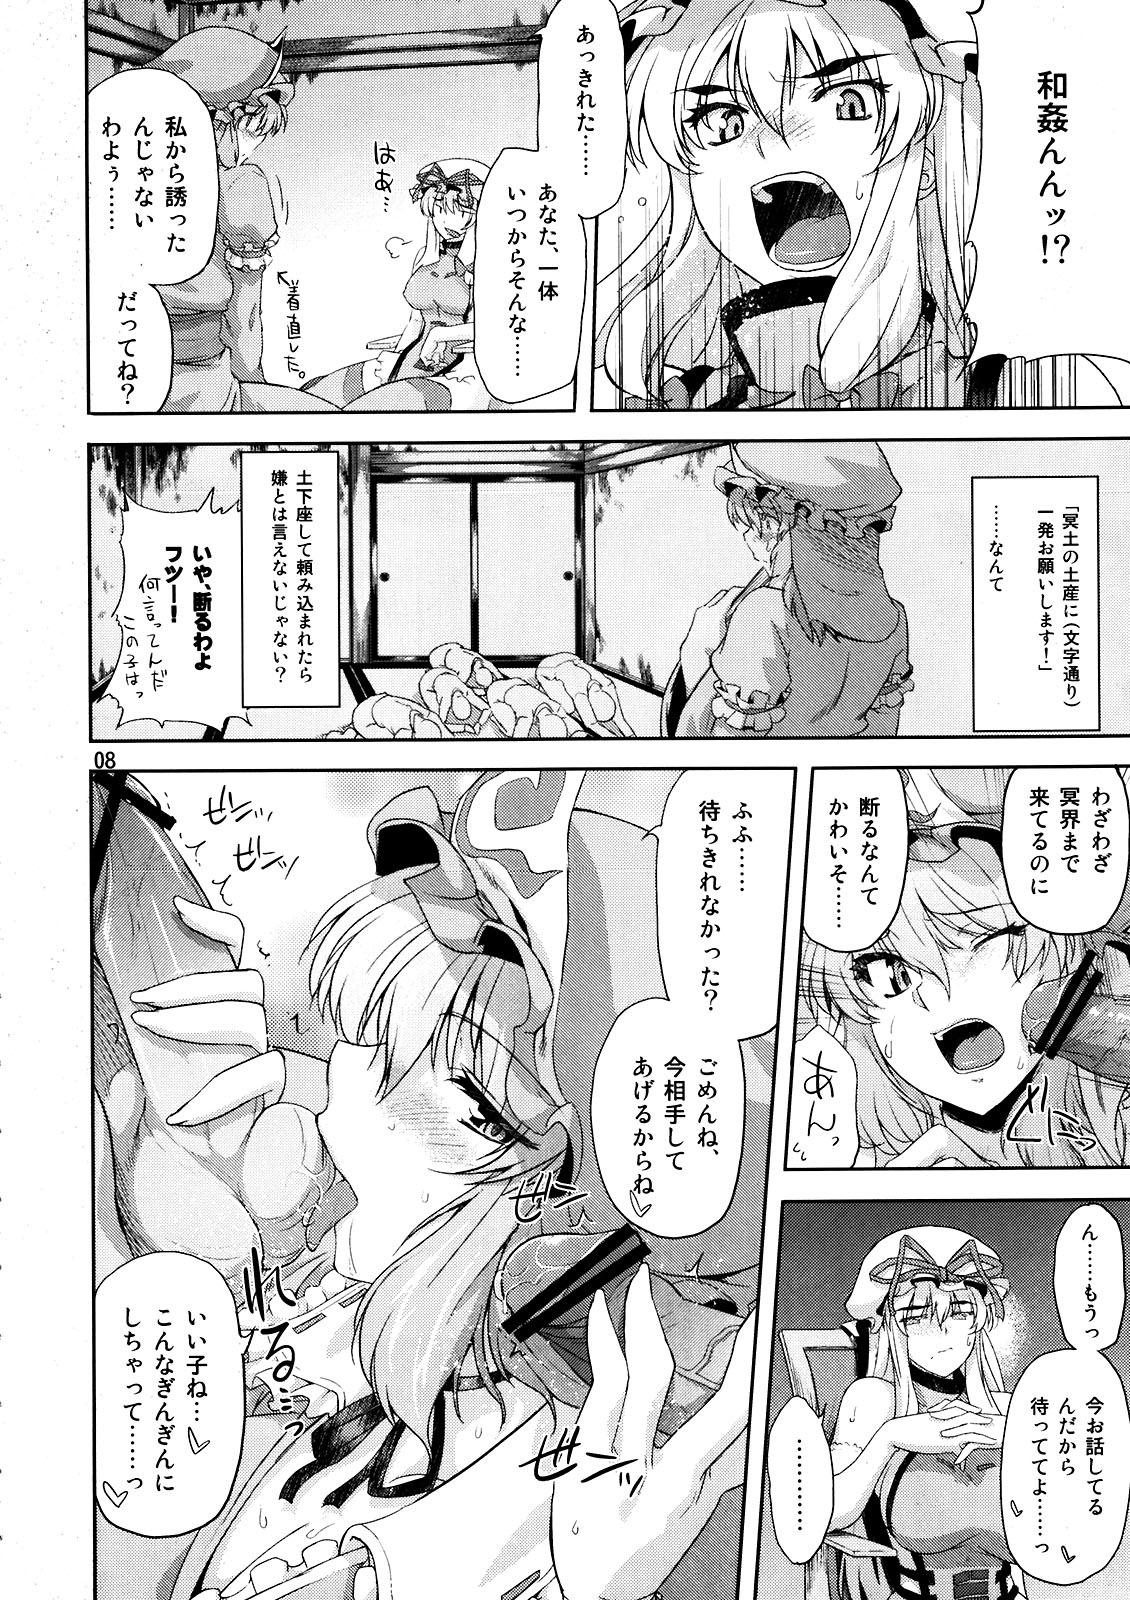 Tight Toshimaen 0 - Touhou project Prostituta - Page 8